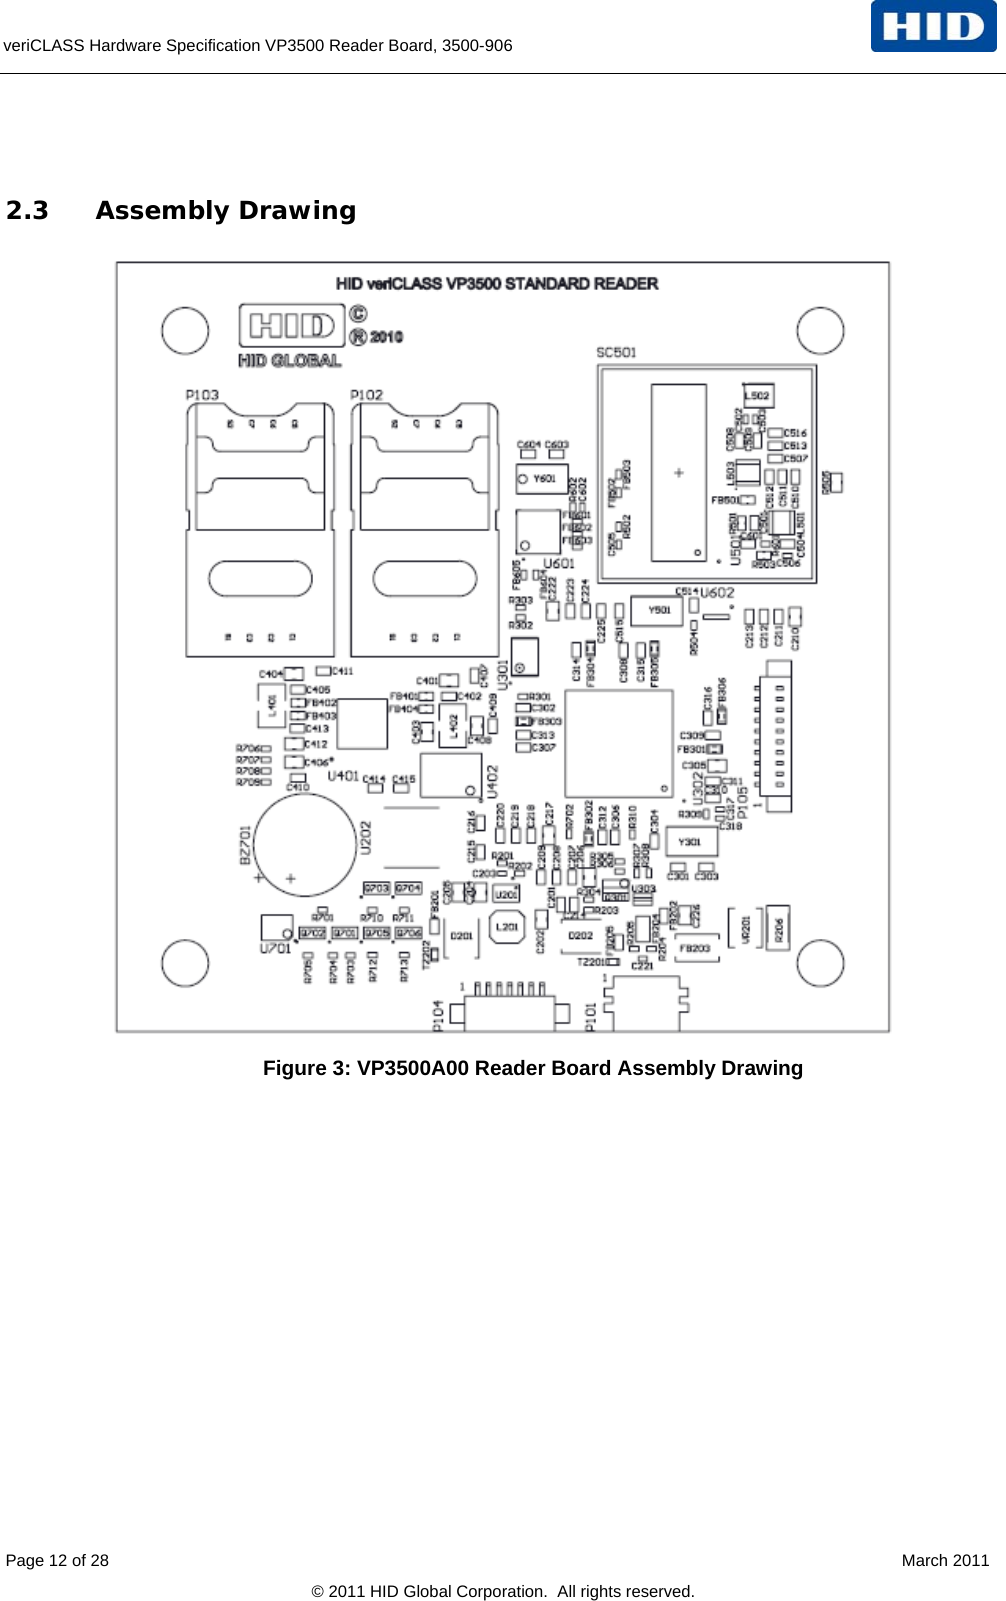  veriCLASS Hardware Specification VP3500 Reader Board, 3500-906    2.3 Assembly Drawing   Figure 3: VP3500A00 Reader Board Assembly Drawing    Page 12 of 28    March 2011 © 2011 HID Global Corporation.  All rights reserved. 